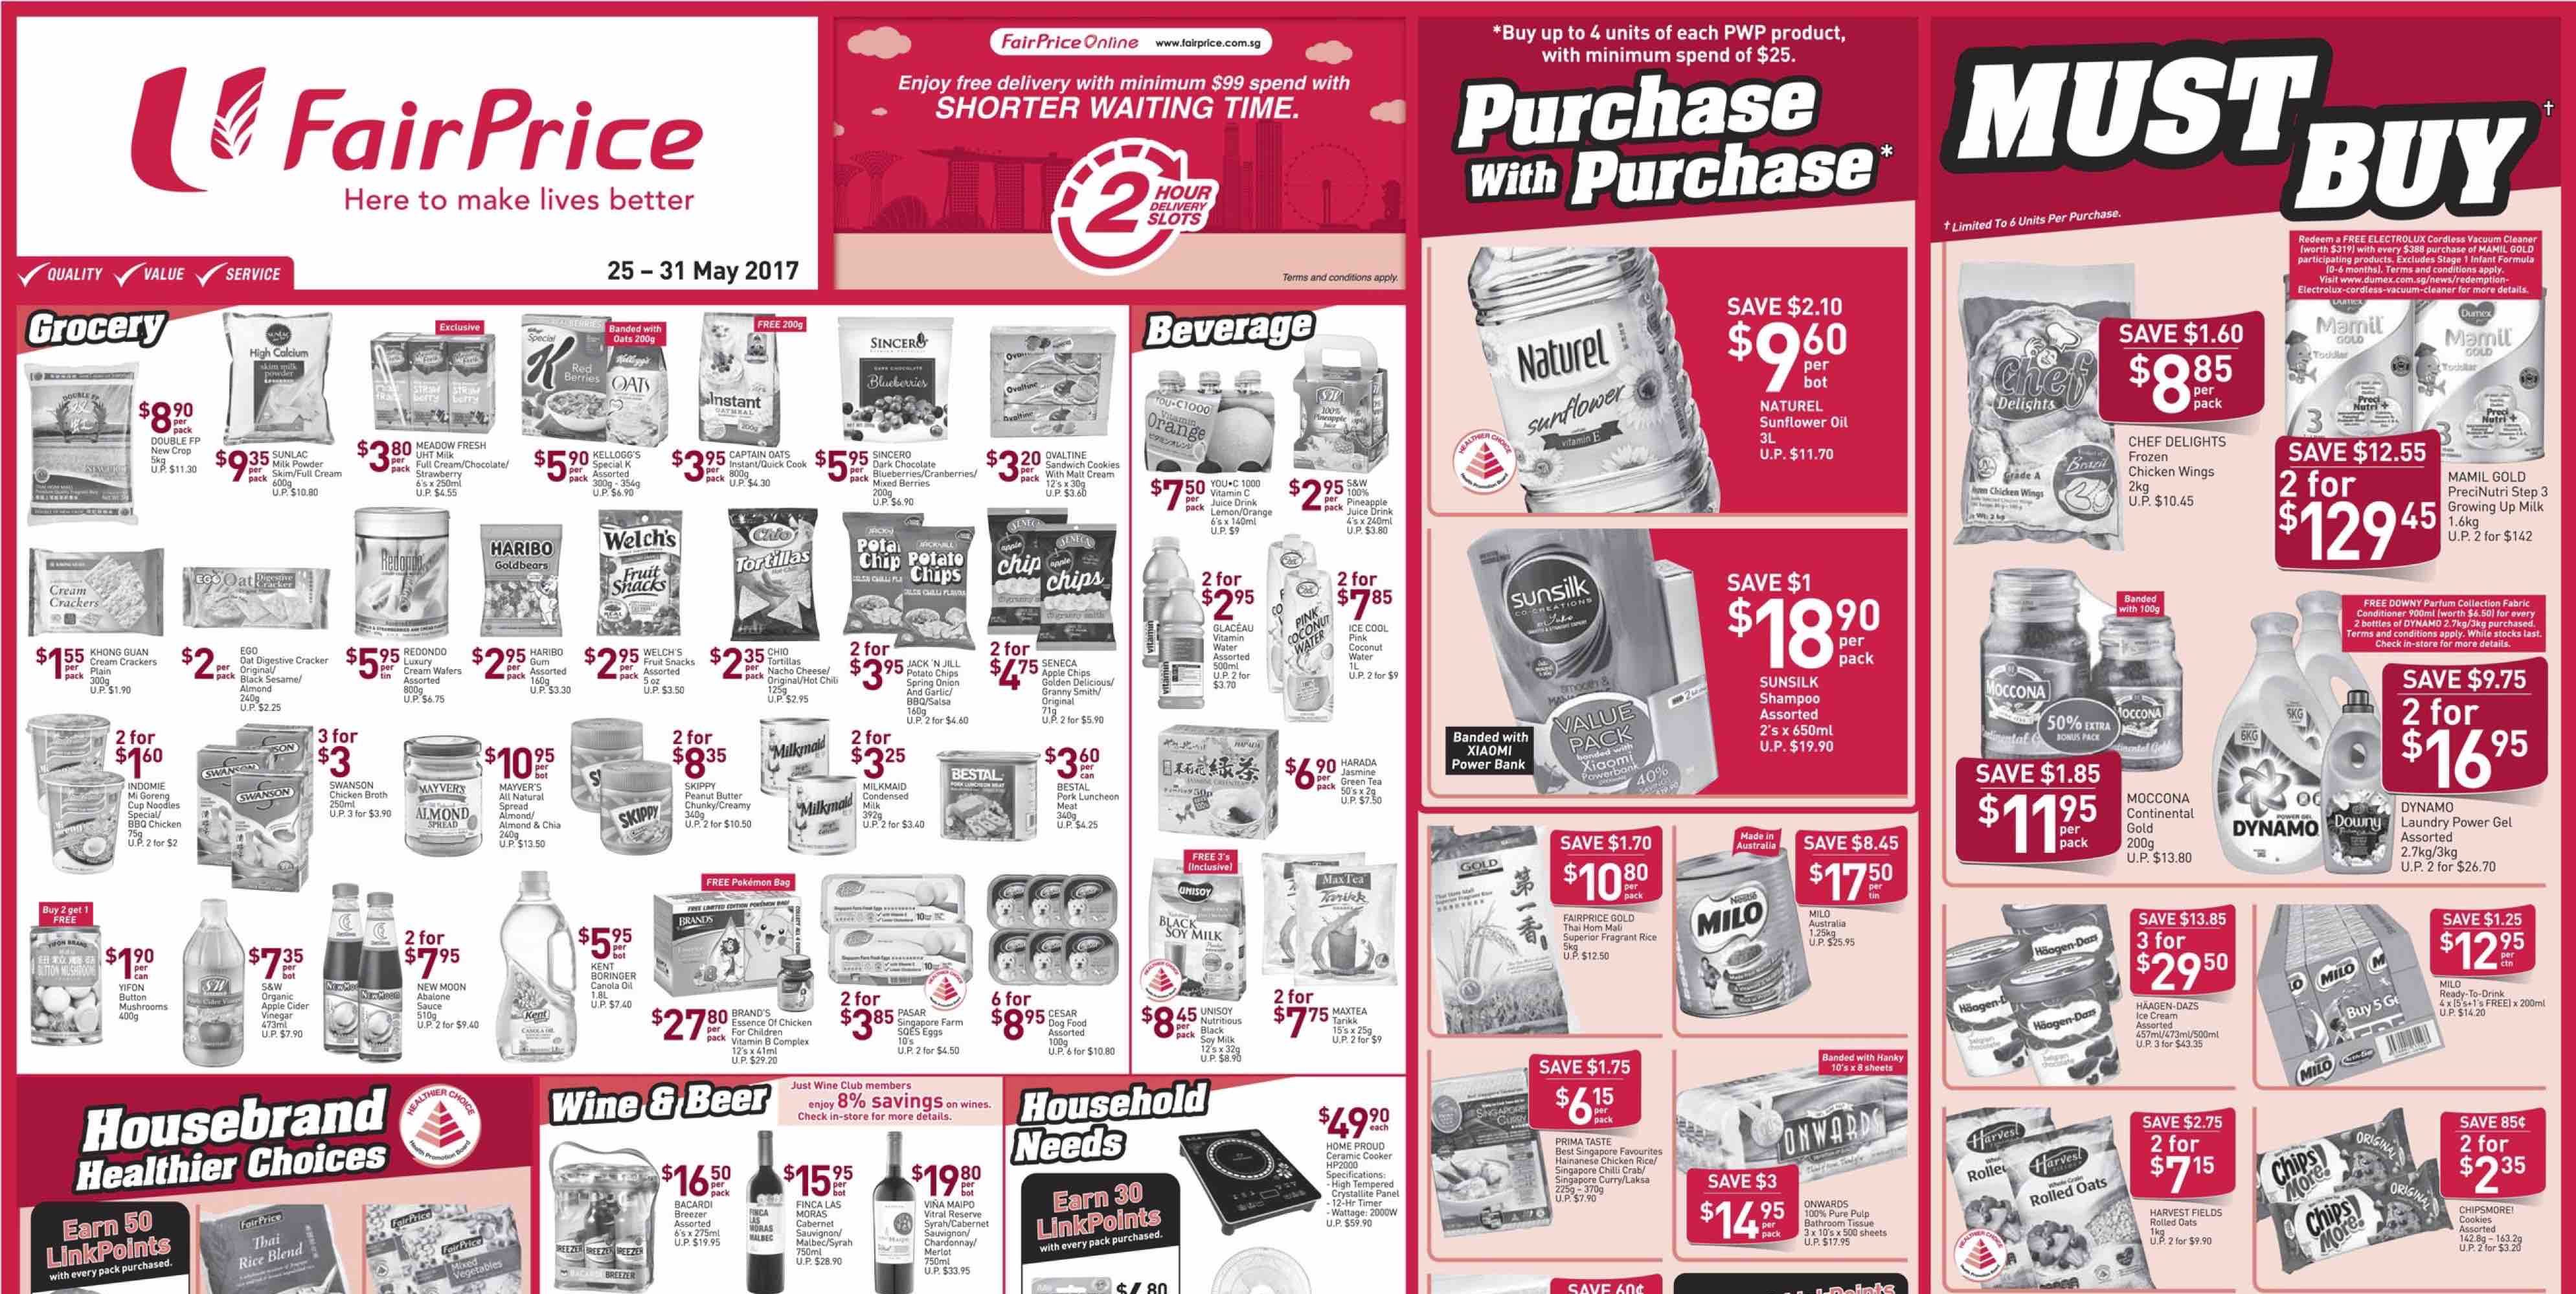 NTUC FairPrice Singapore Your Weekly Saver Promotion 25-31 May 2017